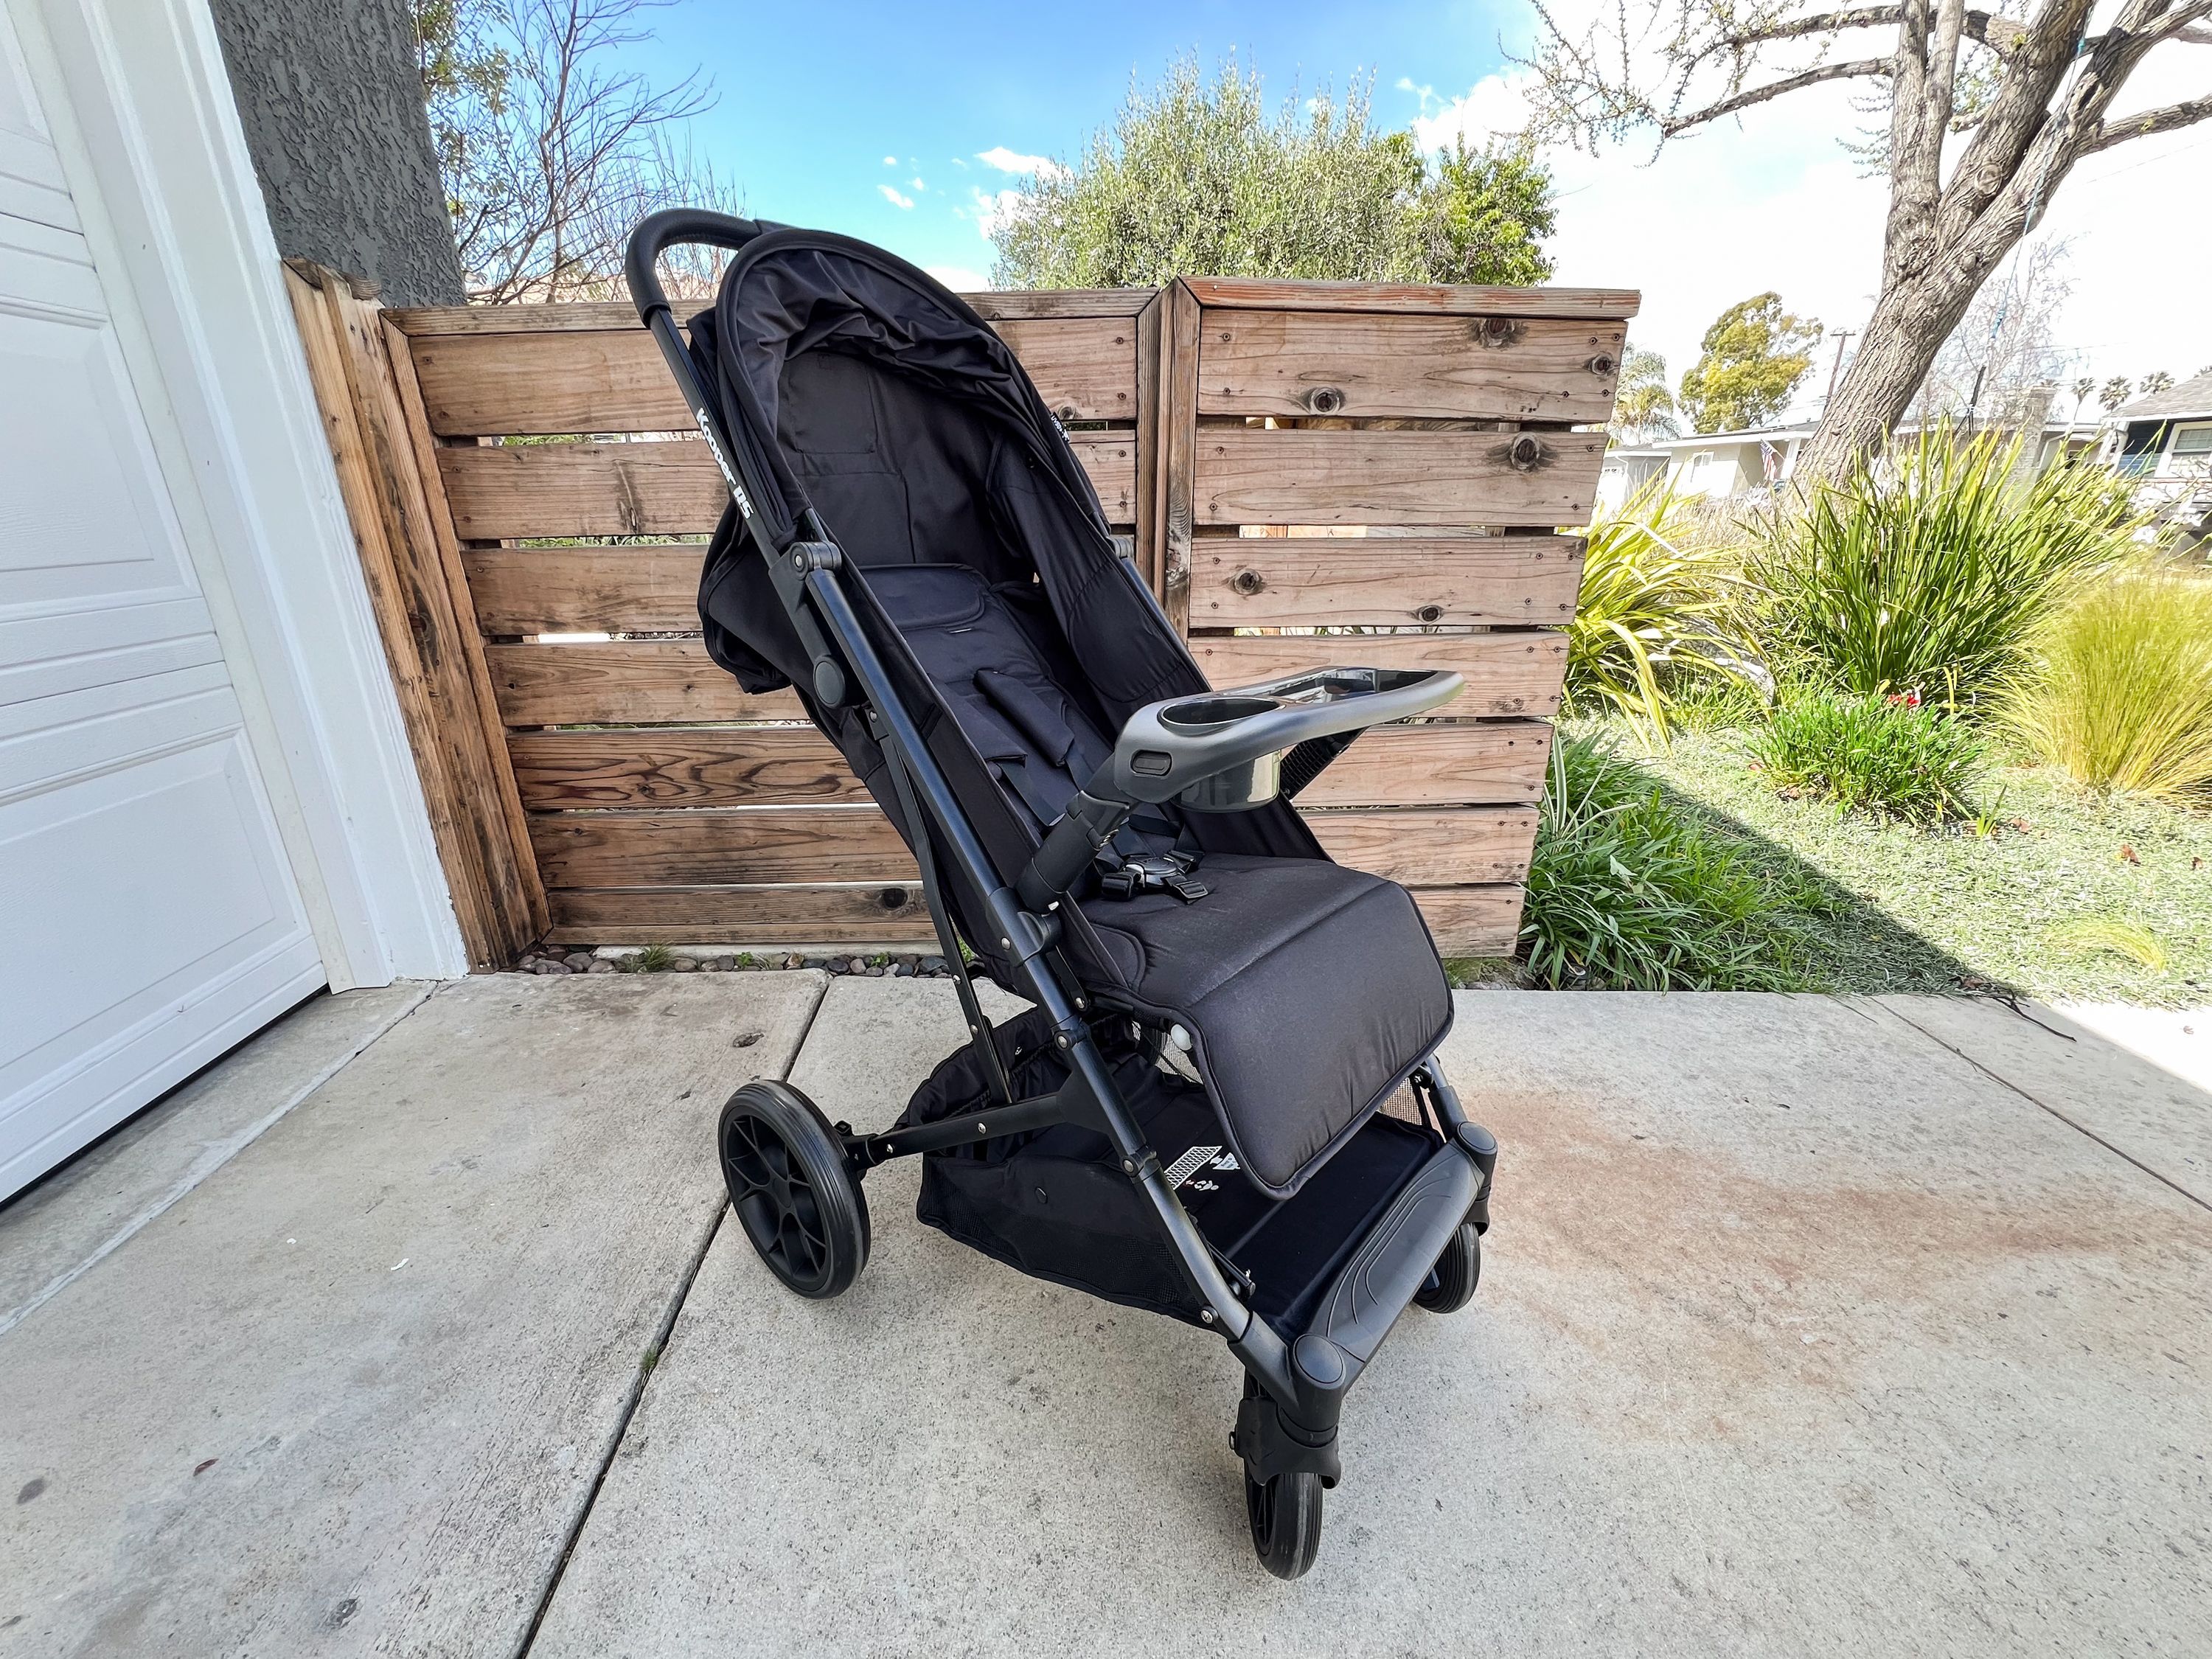 <p><strong>$259.99</strong></p><p><a href="https://www.amazon.com/Joovy-Kooper-Single-Stroller-Lightweight/dp/B09WZL6DH2?tag=syndication-20&ascsubtag=%5Bartid%7C2089.g.60267433%5Bsrc%7Cmsn-us">Shop Now</a></p><p>In addition to its all-terrain wheels and easy maneuverability, a major perk of Joovy’s Kooper travel stroller is its washable fabric. The fabric is removable and machine washable, so you don’t have to spot clean every time your kid drops food — which, if your child is anything like mine, is constant.</p><p>A three-panel, water-repellent canopy provides excellent sun coverage, but it’s the fourth hidden panel that’s really noteworthy, which I discovered when testing the stroller with a kiddo who really, really was not happy with the sun in his eyes. That panel provides UPF 50+ coverage almost all the way to the snack tray. Although the seat doesn’t recline entirely, you can lower it using only one hand, which is huge.</p><p>Snacktime doesn’t have to end when it’s stroller time as the stroller features a swing-open snack tray and cup holder. There’s also a mesh cup holder and a zippered pocket built into the back of the stroller for grownups, and a good-sized storage basket on the bottom can hold up to 15 pounds.</p><p>If you’re giving this as a gift, the Kooper accommodates a 3-month-old to a child up to 55 pounds, but you can also purchase the <a href="https://www.amazon.com/JOOVY-Kooper-Universal-Seat-Adapter/dp/B07NFT83VG?tag=syndication-20&ascsubtag=%5Bartid%7C2089.g.60267433%5Bsrc%7Cmsn-us">Kooper car seat adapter</a> separately to use an infant car seat.</p><p>Again, Cat Bowen is a big, big fan of this stroller, loving the fold, but also loving the easy hand holds this stroller has when it's folded that not all travel strollers have. </p>